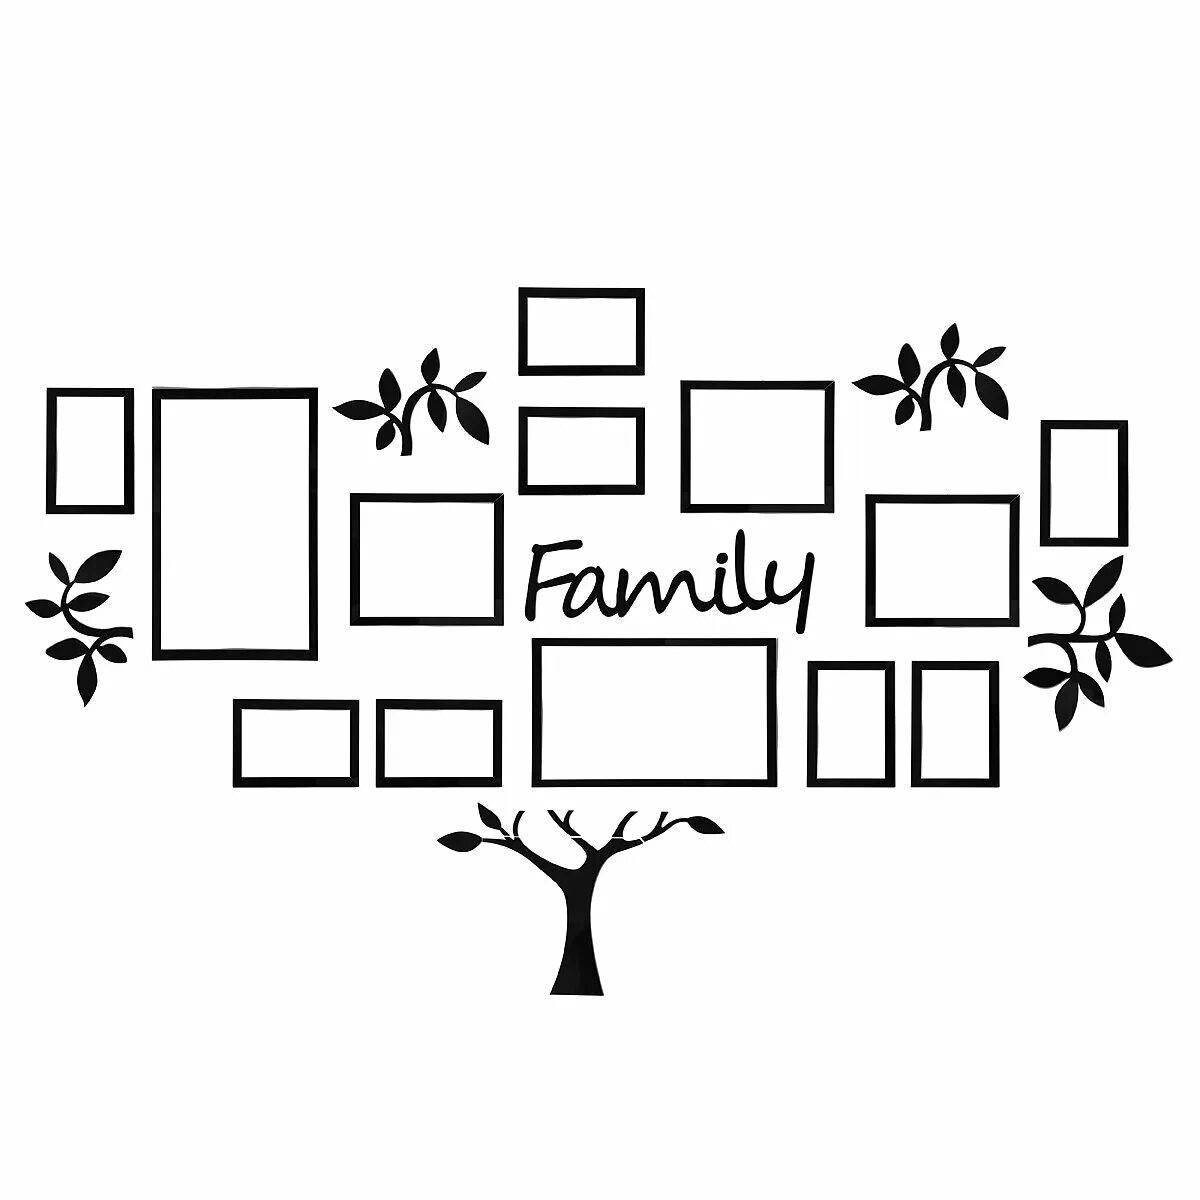 Majestic family tree template to fill